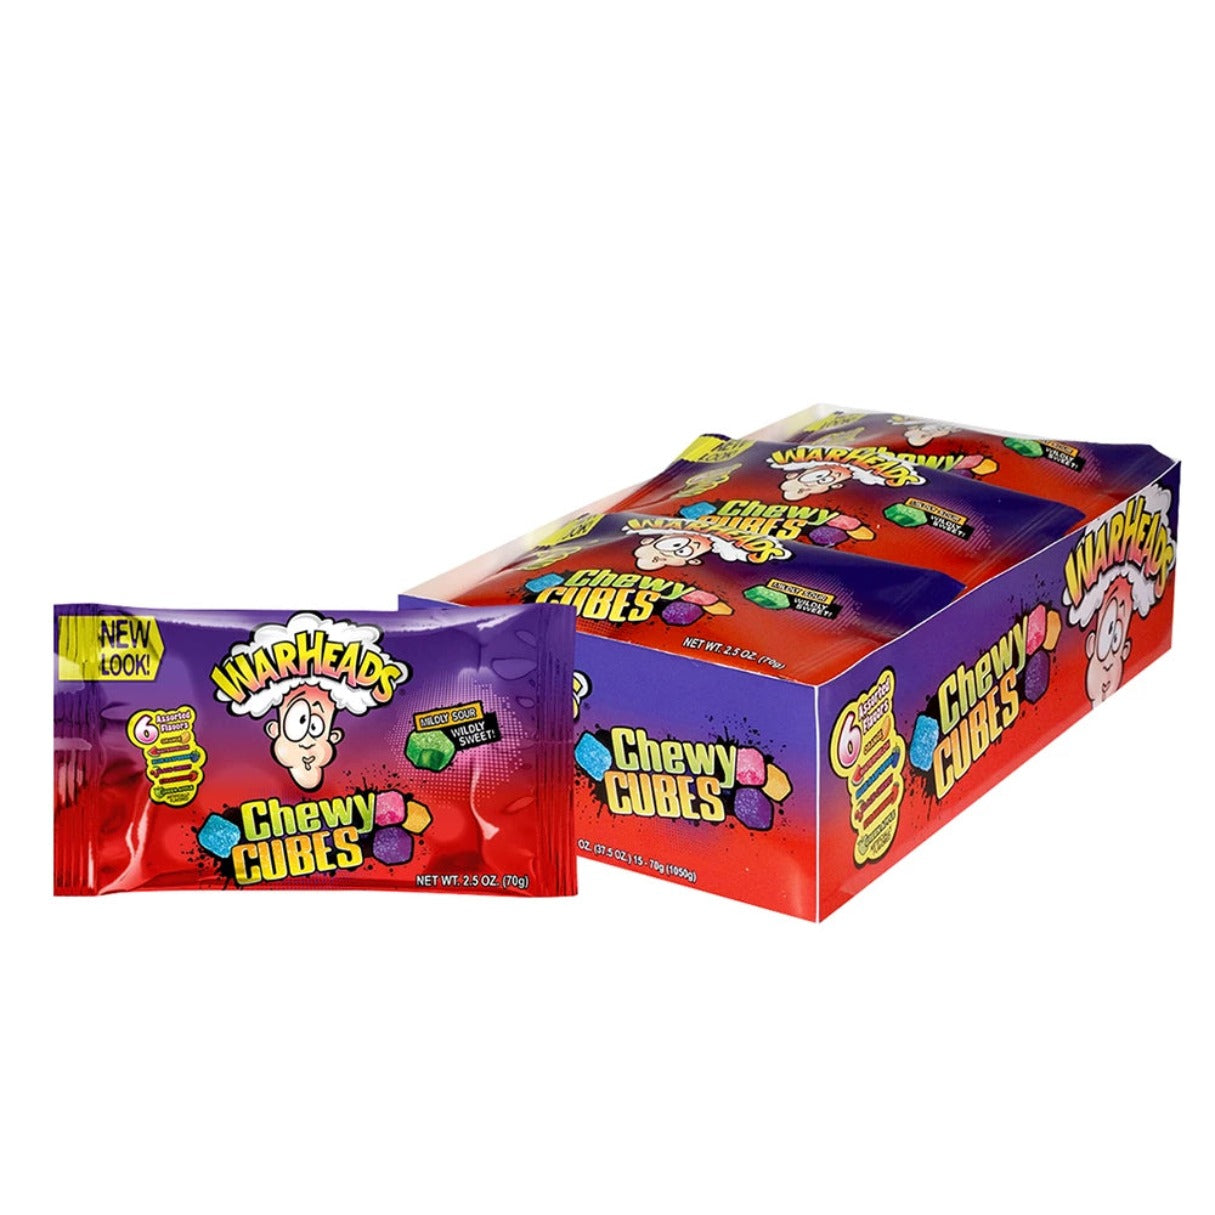 Warheads Sour Chewy Cubes Bag 2oz - 15ct